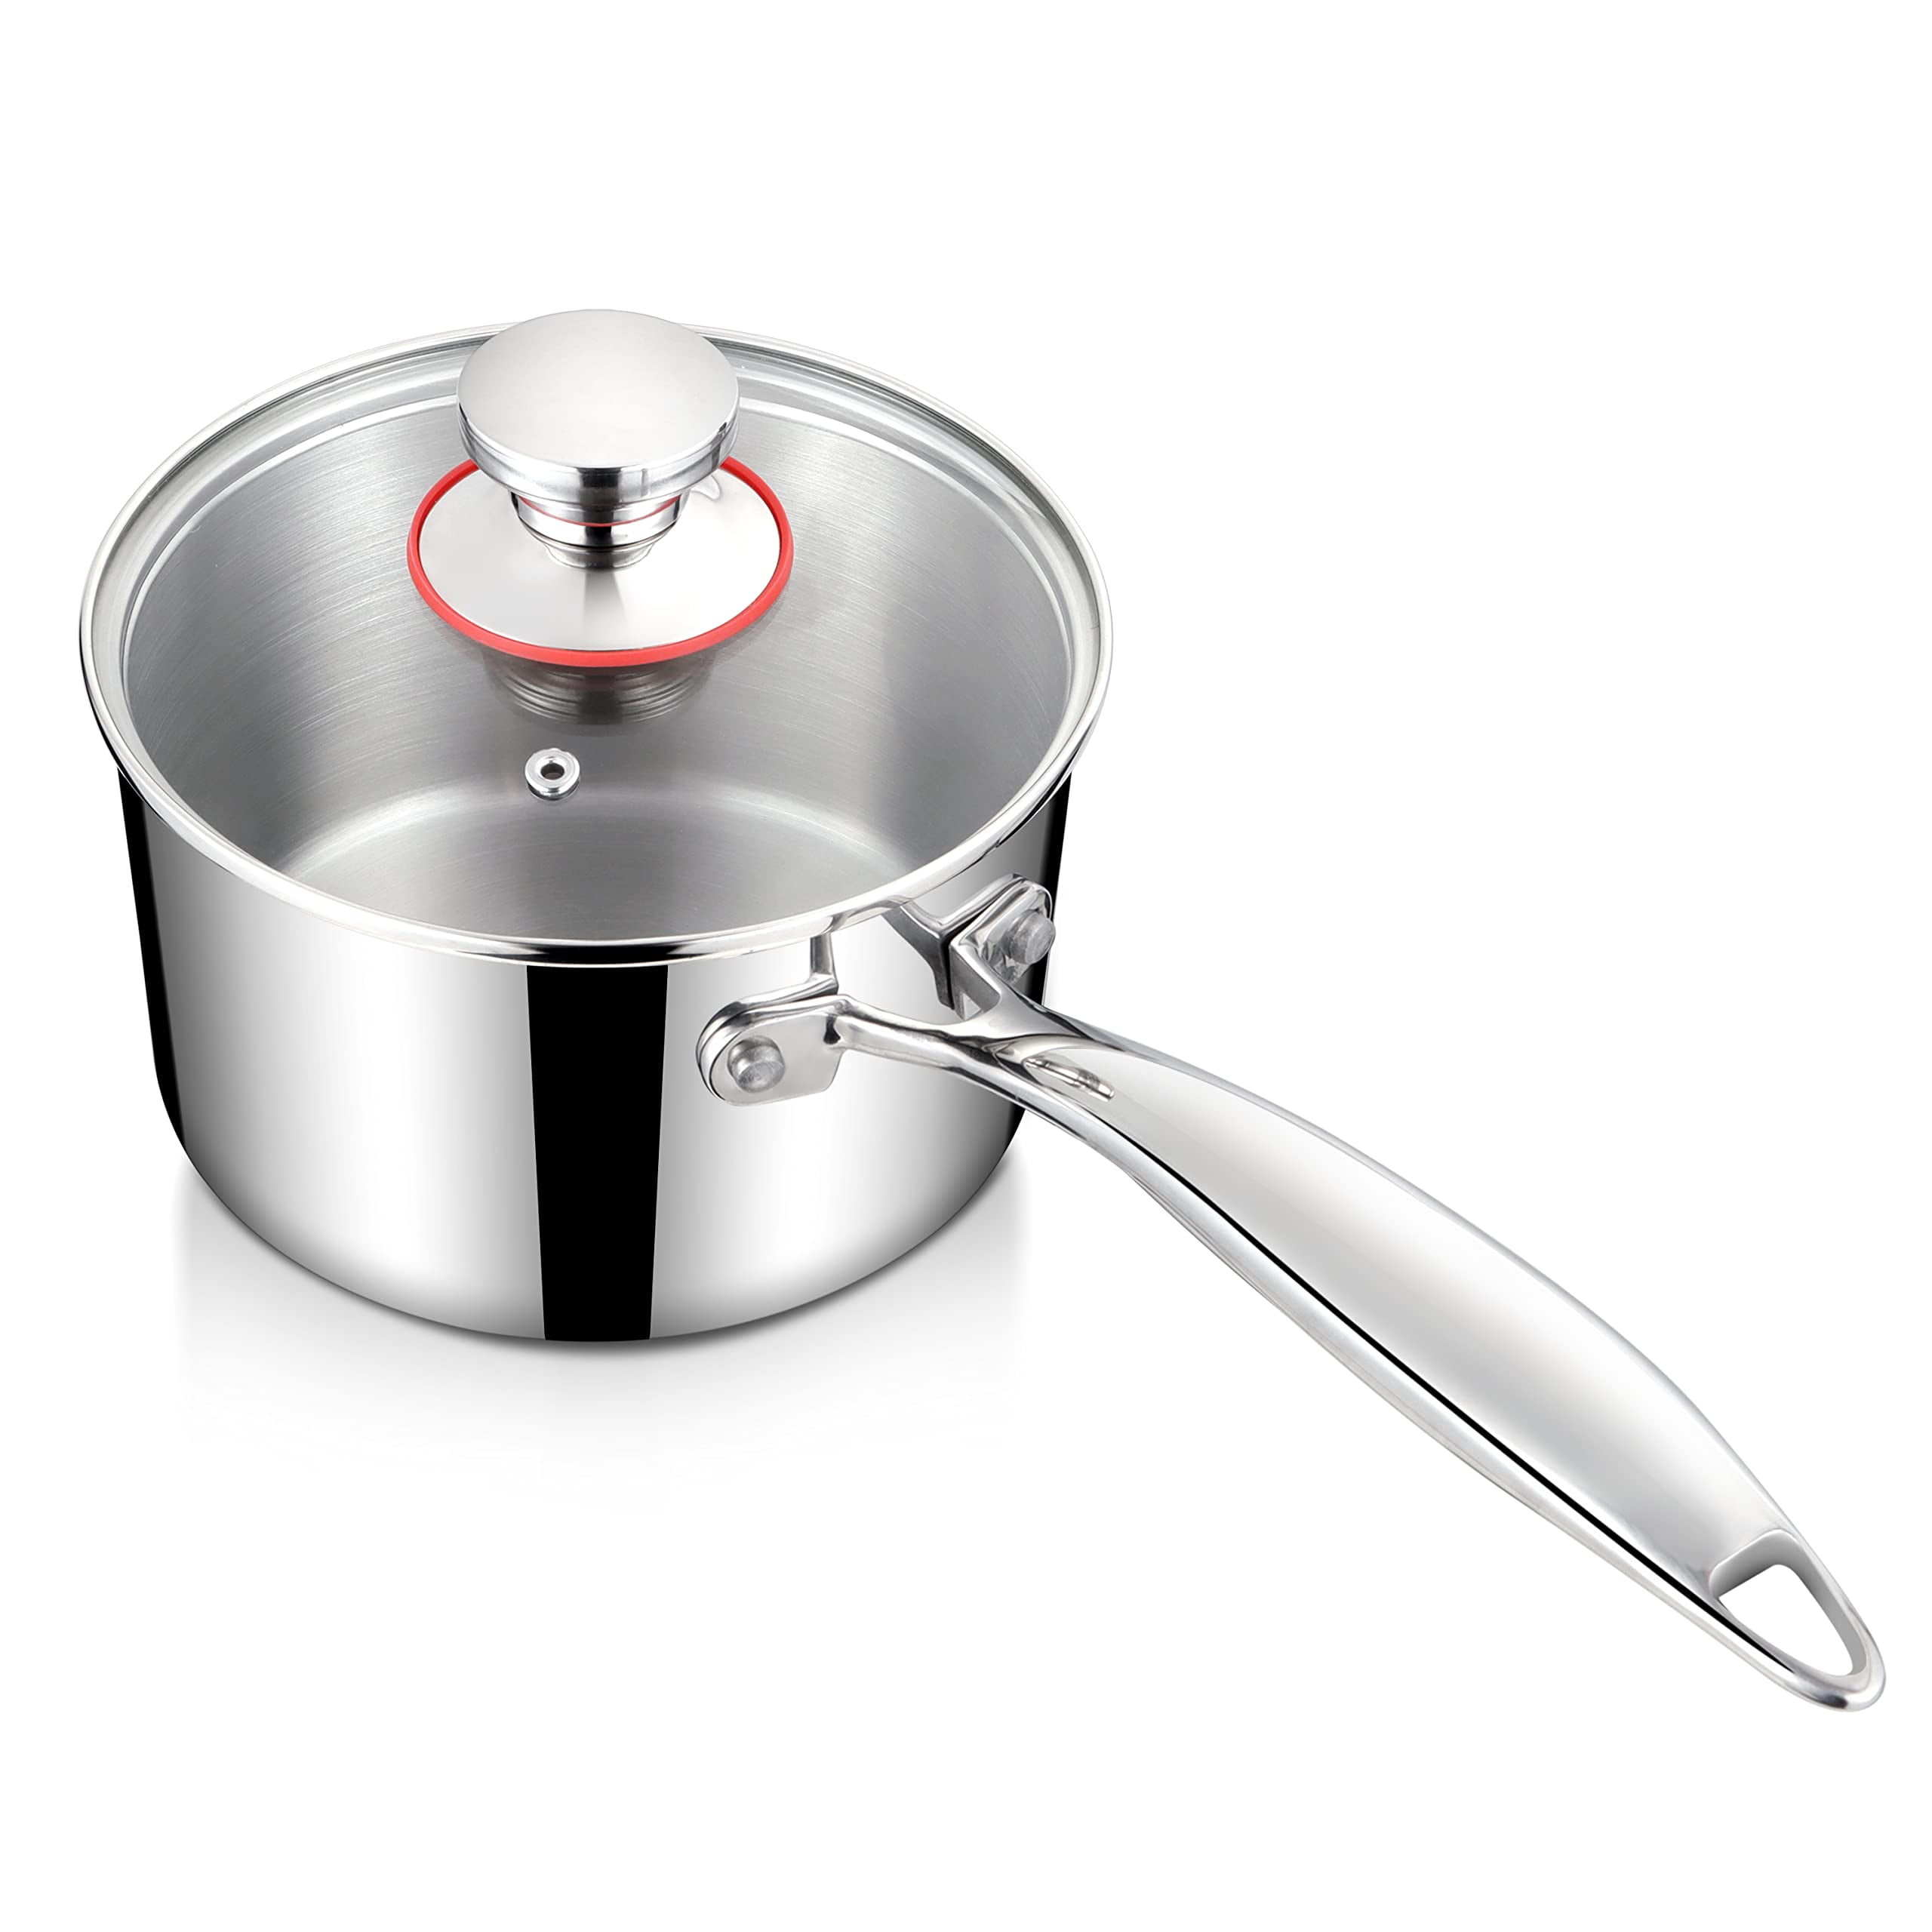 LOLYKITCH Whole Body Tri-Ply Stainless Steel 2 Quart Saucepan with